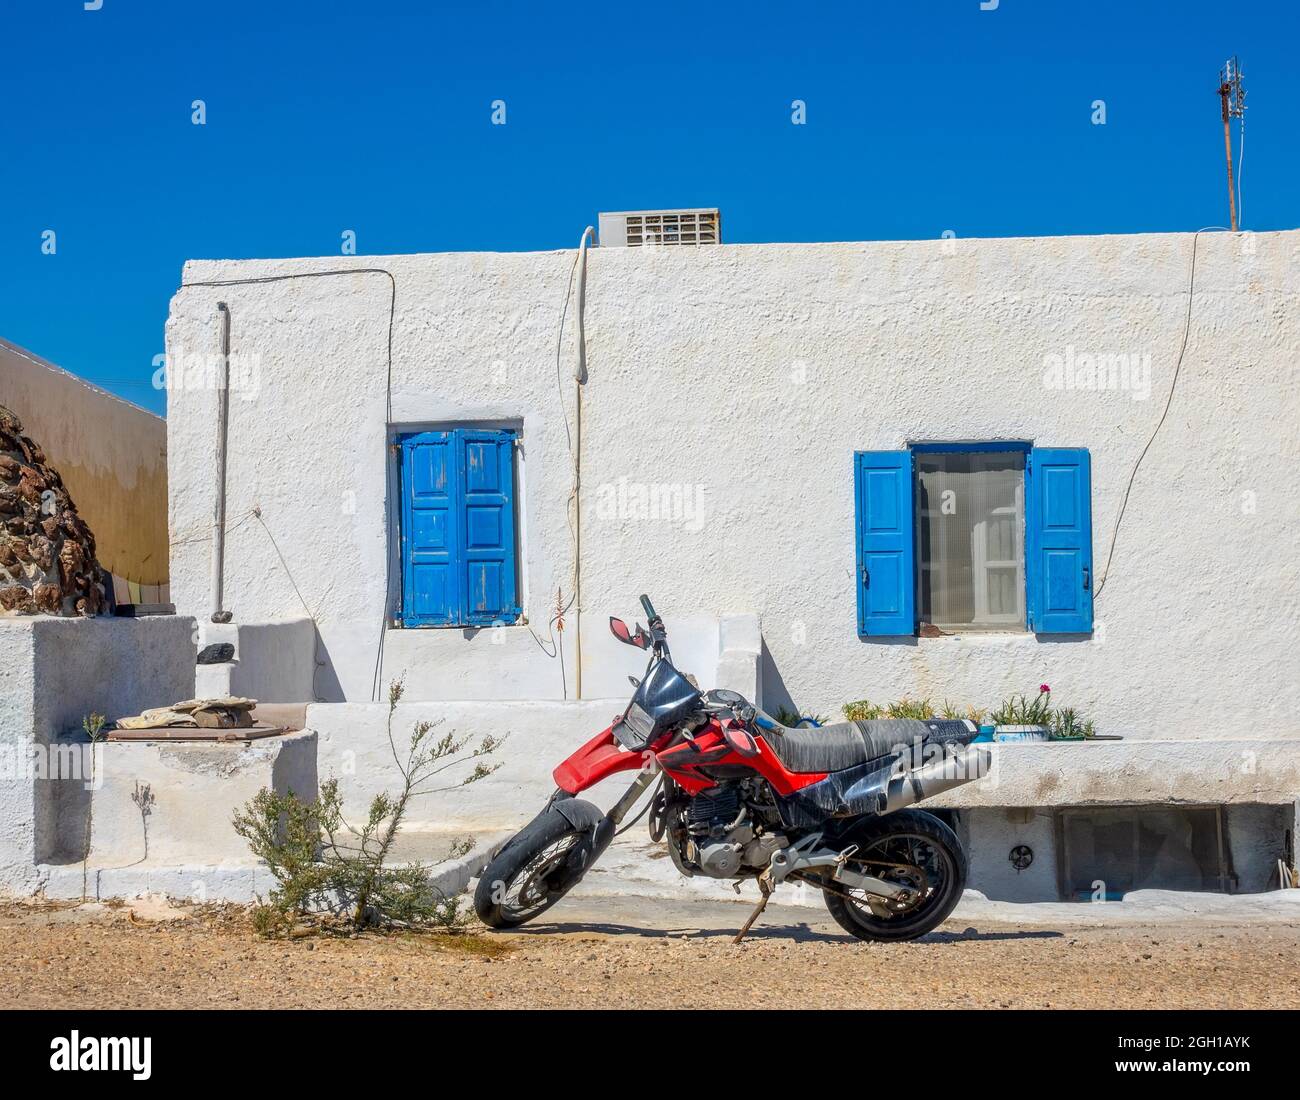 Greece. Oia town on the island of Santorini. Red motorcycle in front of the house. Stock Photo